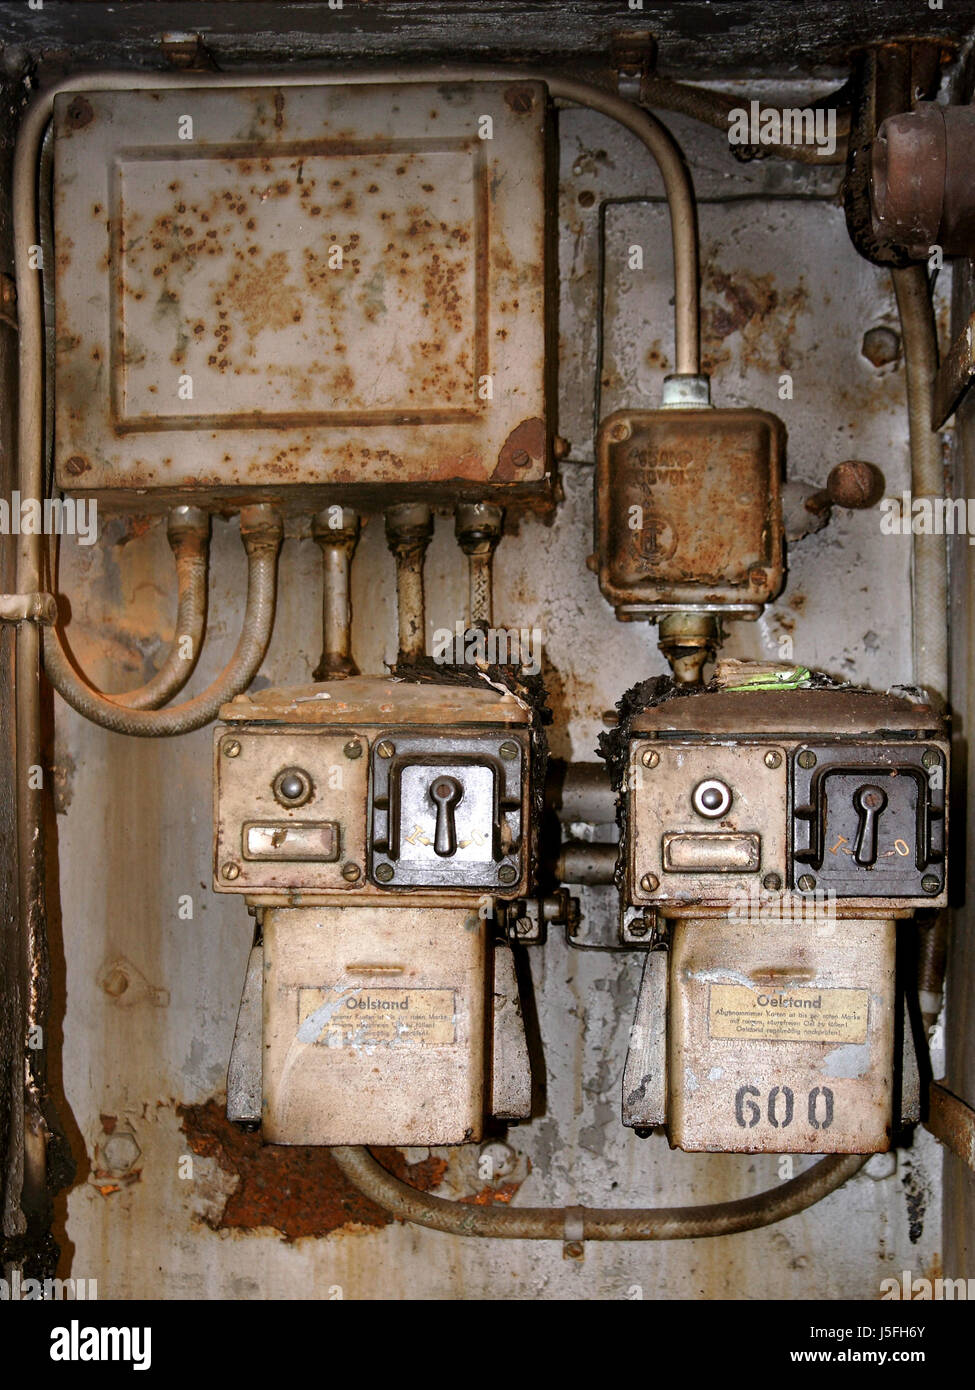 historical switch rust rusted out serve company concern corporation defect  knob Stock Photo - Alamy